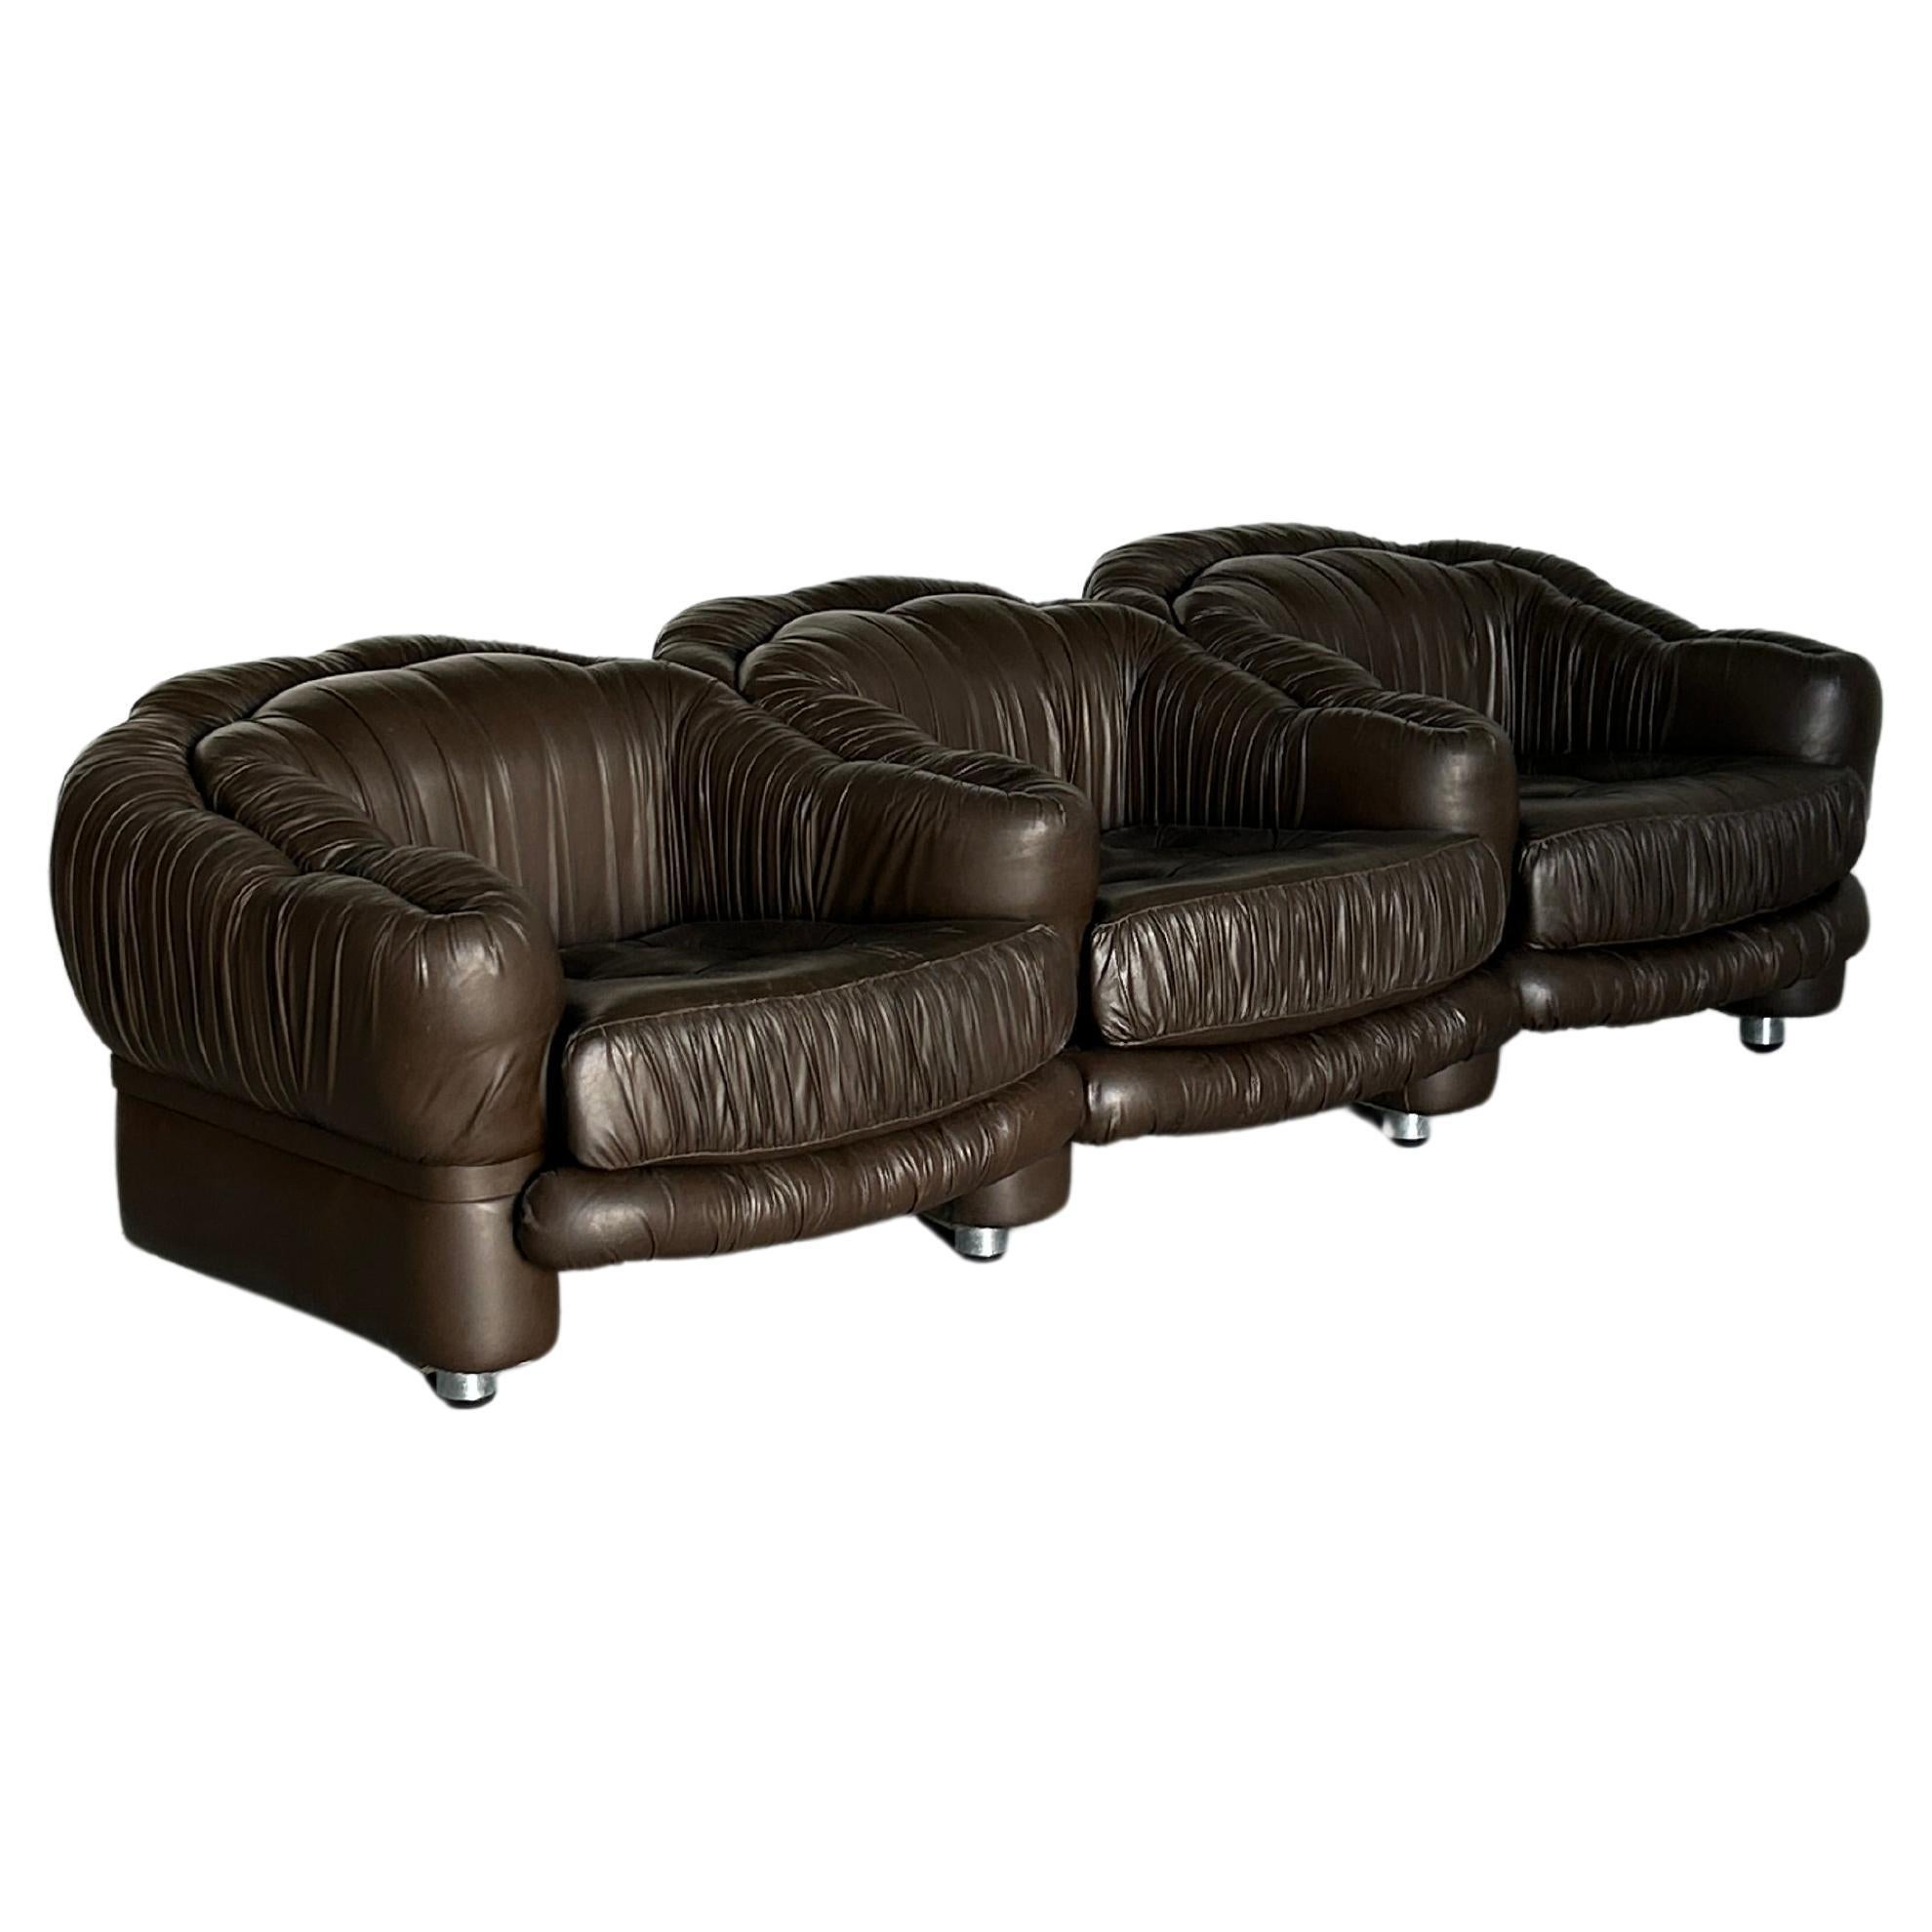 Three-Seater Sofa in Dark Brown Leather by Axel Di Pietrobon, 1970s Italy For Sale